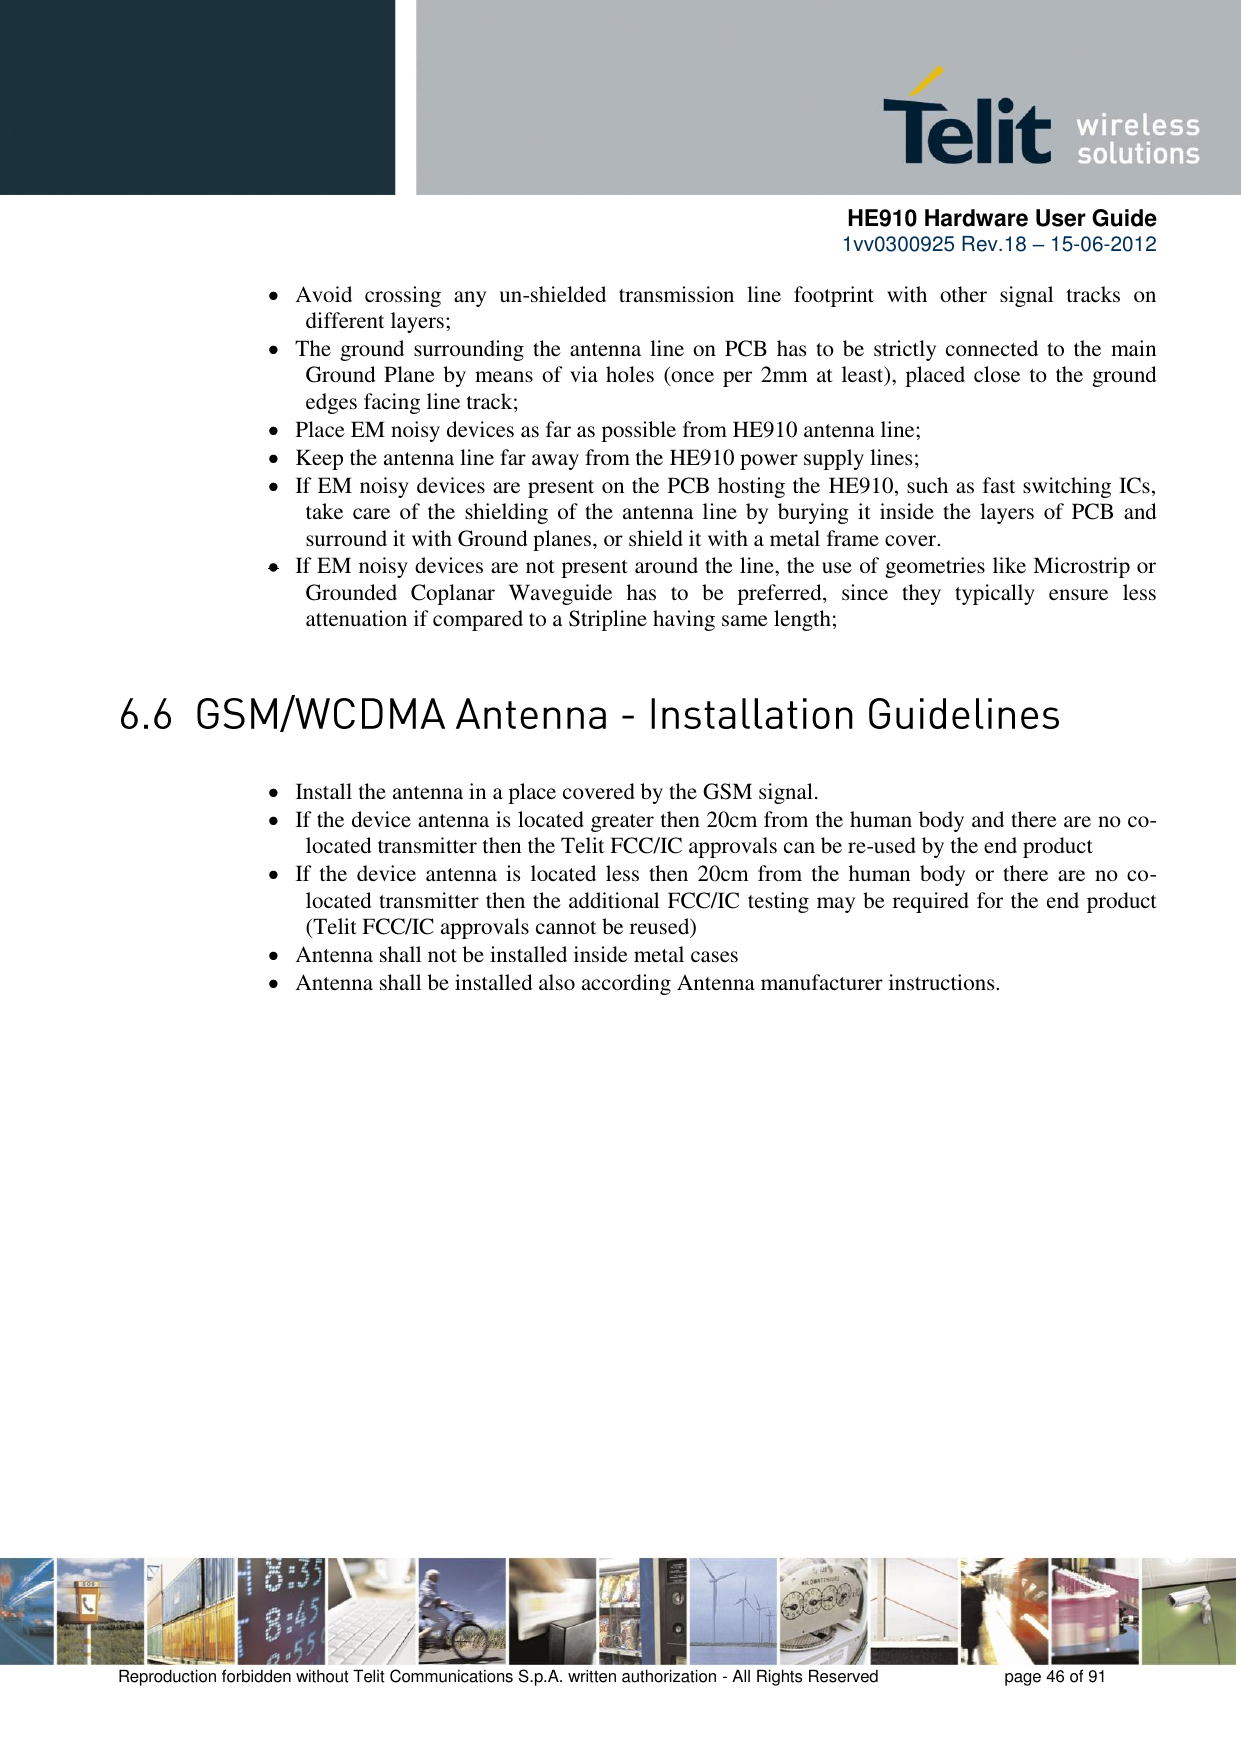      HE910 Hardware User Guide 1vv0300925 Rev.18 – 15-06-2012    Reproduction forbidden without Telit Communications S.p.A. written authorization - All Rights Reserved    page 46 of 91   Avoid  crossing  any  un-shielded  transmission  line  footprint  with  other  signal  tracks  on different layers;  The ground surrounding the antenna line on PCB has to be strictly connected to the  main Ground Plane by means of via holes (once per 2mm at least), placed close to the ground edges facing line track;  Place EM noisy devices as far as possible from HE910 antenna line;  Keep the antenna line far away from the HE910 power supply lines;  If EM noisy devices are present on the PCB hosting the HE910, such as fast switching ICs, take care of the  shielding of the antenna line by burying it  inside the layers of PCB and surround it with Ground planes, or shield it with a metal frame cover.  If EM noisy devices are not present around the line, the use of geometries like Microstrip or Grounded  Coplanar  Waveguide  has  to  be  preferred,  since  they  typically  ensure  less attenuation if compared to a Stripline having same length;   Install the antenna in a place covered by the GSM signal.  If the device antenna is located greater then 20cm from the human body and there are no co-located transmitter then the Telit FCC/IC approvals can be re-used by the end product  If the  device antenna  is  located less then 20cm from  the  human  body  or there are no co-located transmitter then the additional FCC/IC testing may be required for the end product (Telit FCC/IC approvals cannot be reused)  Antenna shall not be installed inside metal cases   Antenna shall be installed also according Antenna manufacturer instructions. 